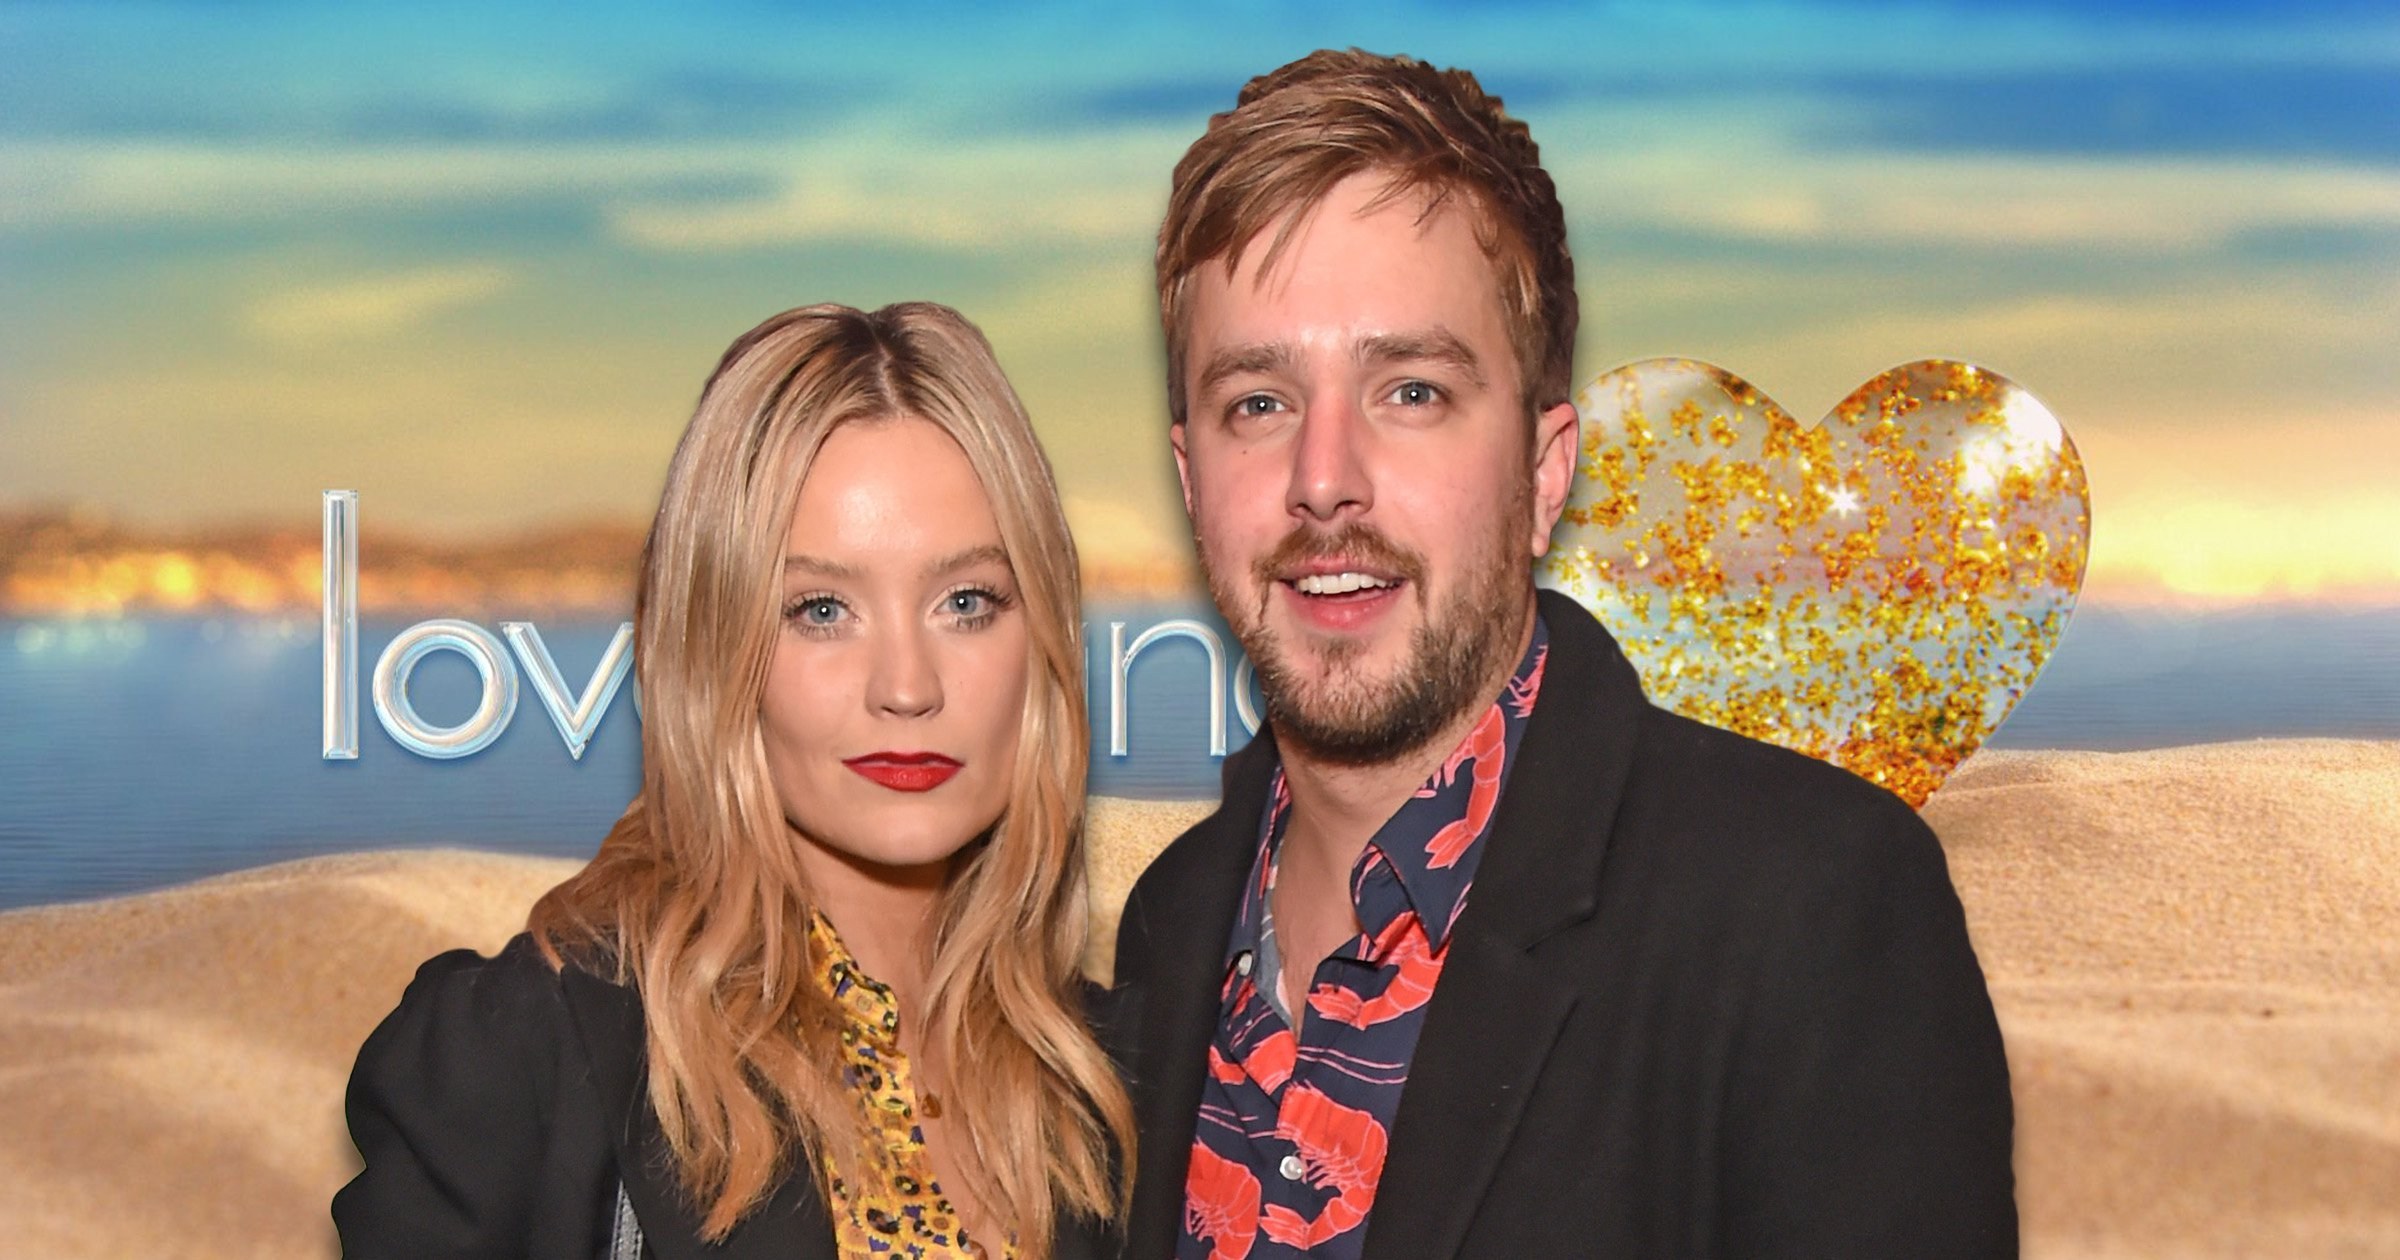 Love Island’s Iain Stirling praises Laura Whitmore ahead of winter series finale